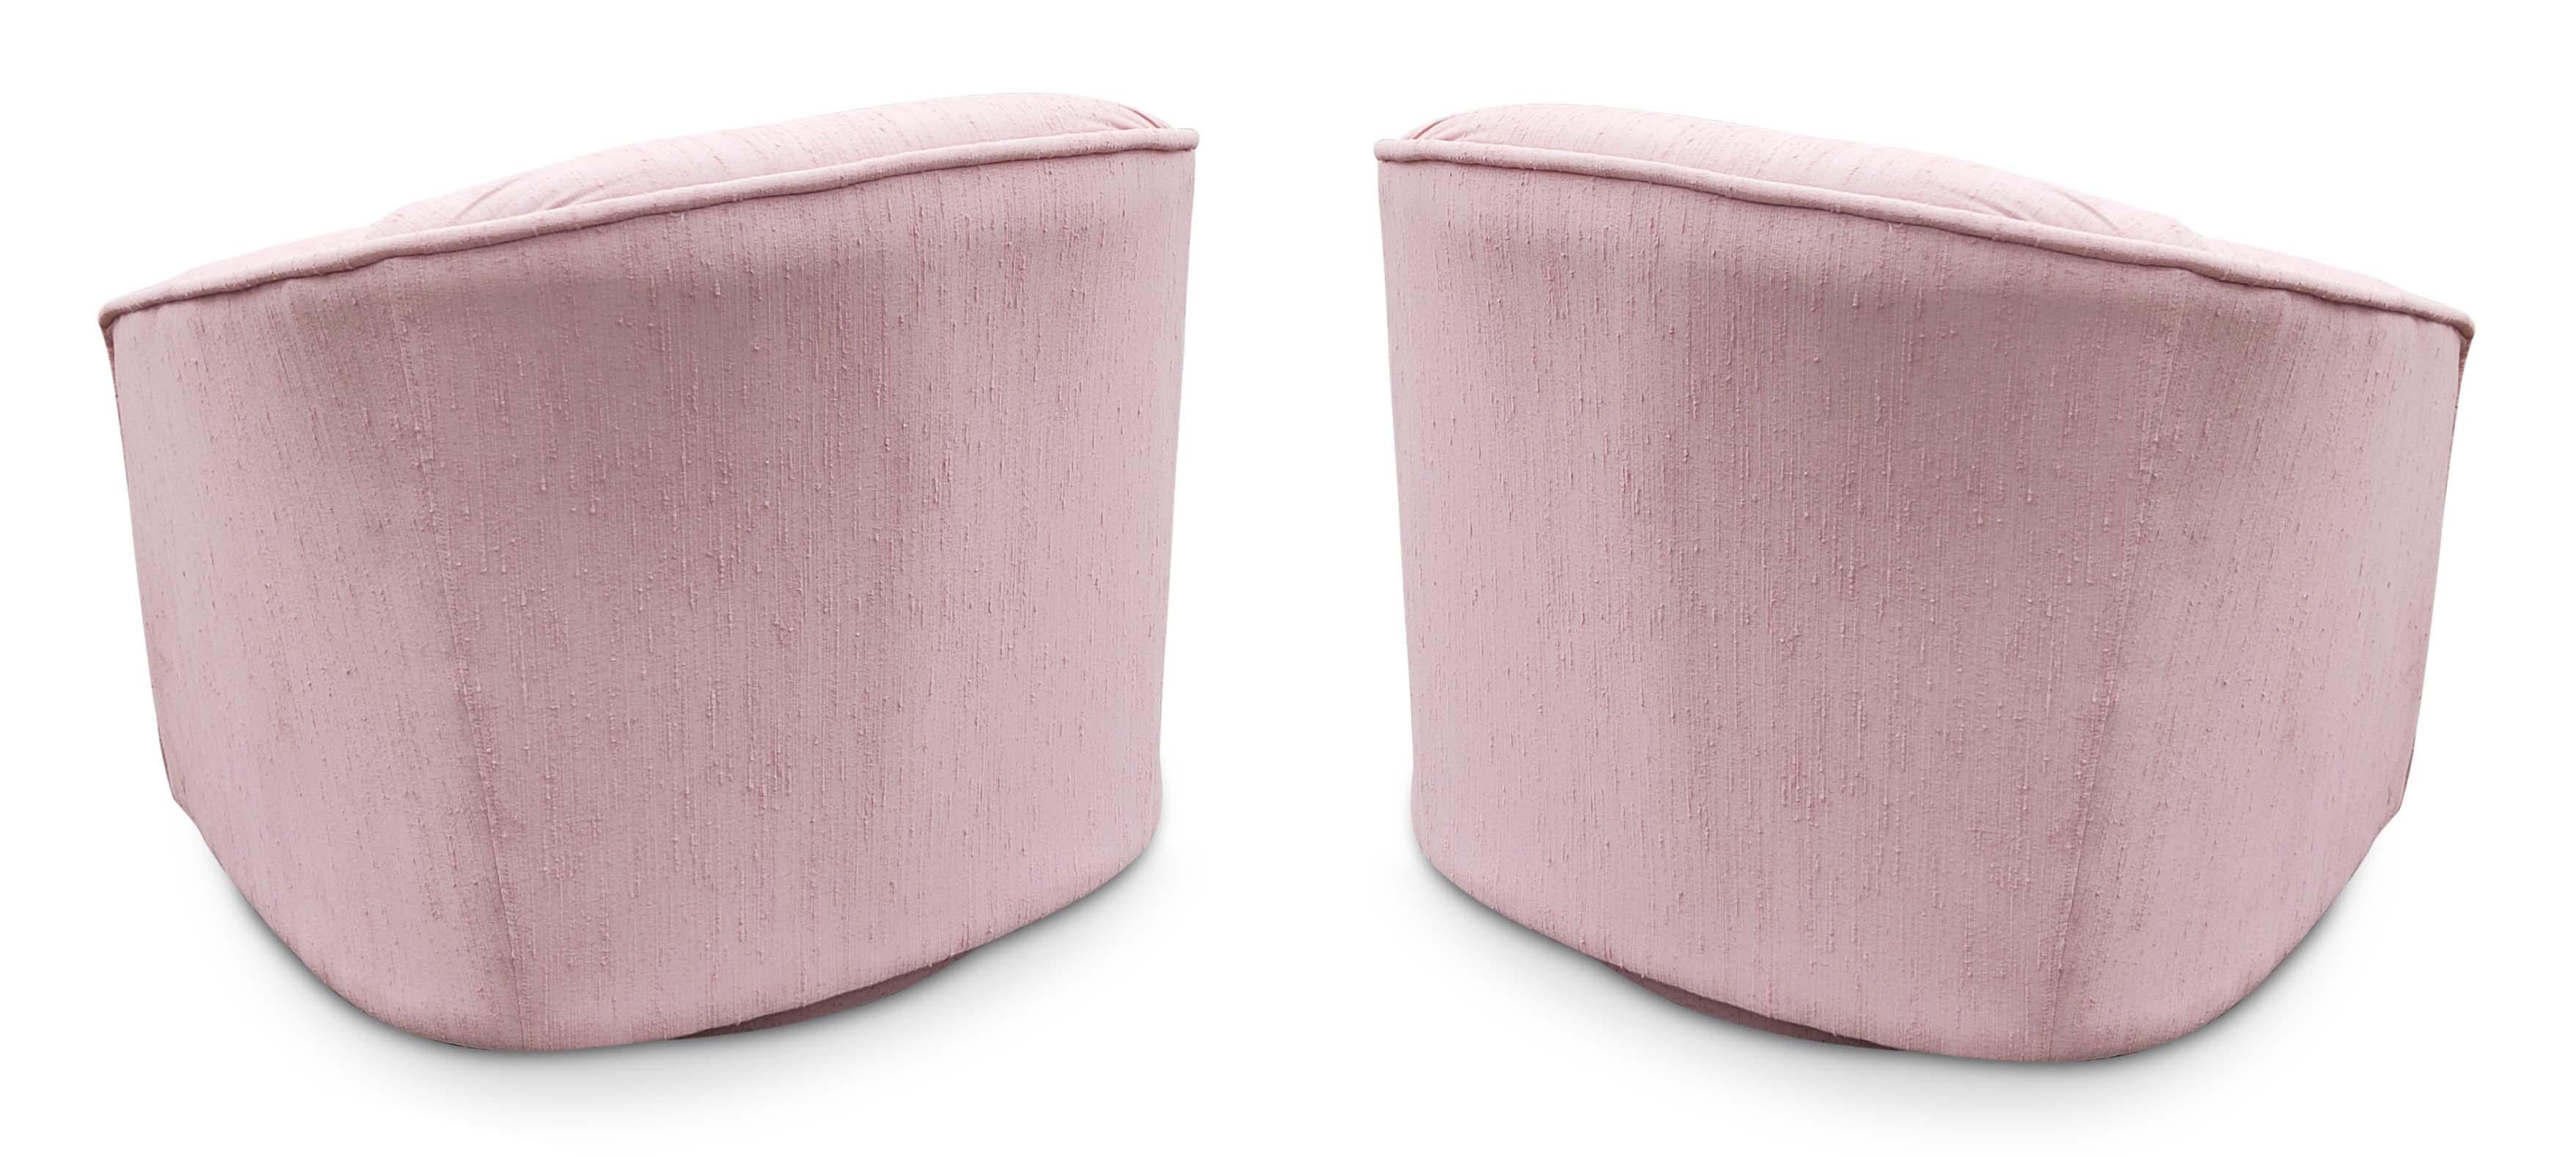 Fresh from the original home, now presented to you, a pair of 1980s barrel-form pink upholstered lounge chairs in very good vintage and original condition. Classic barrel form lounge chair with tailored styling. They are ready to use in as-is